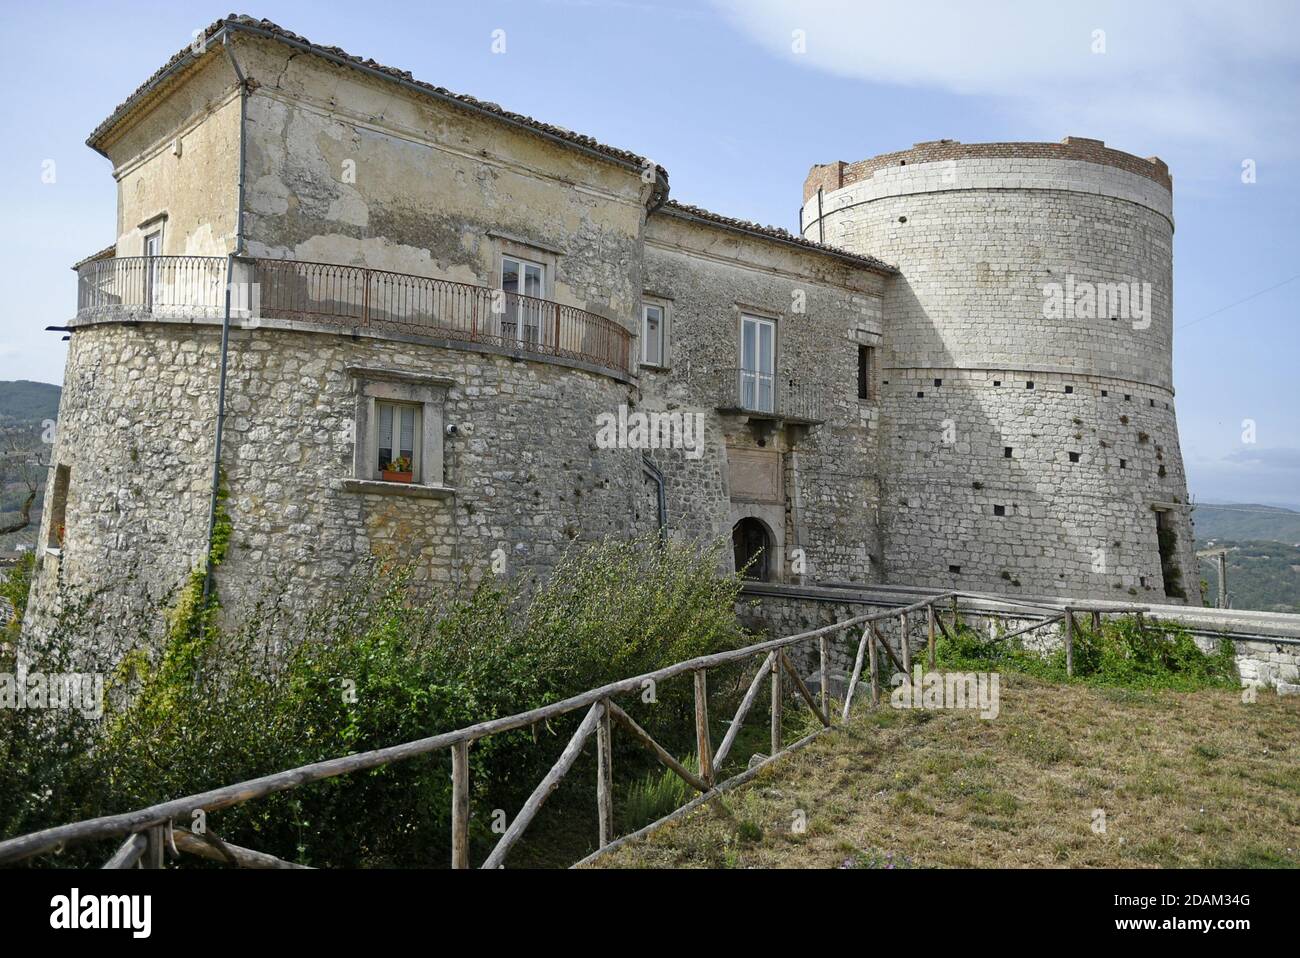 View of the castle of Ferrazzano, a village in the mountains of the Molise region, Italy. Stock Photo